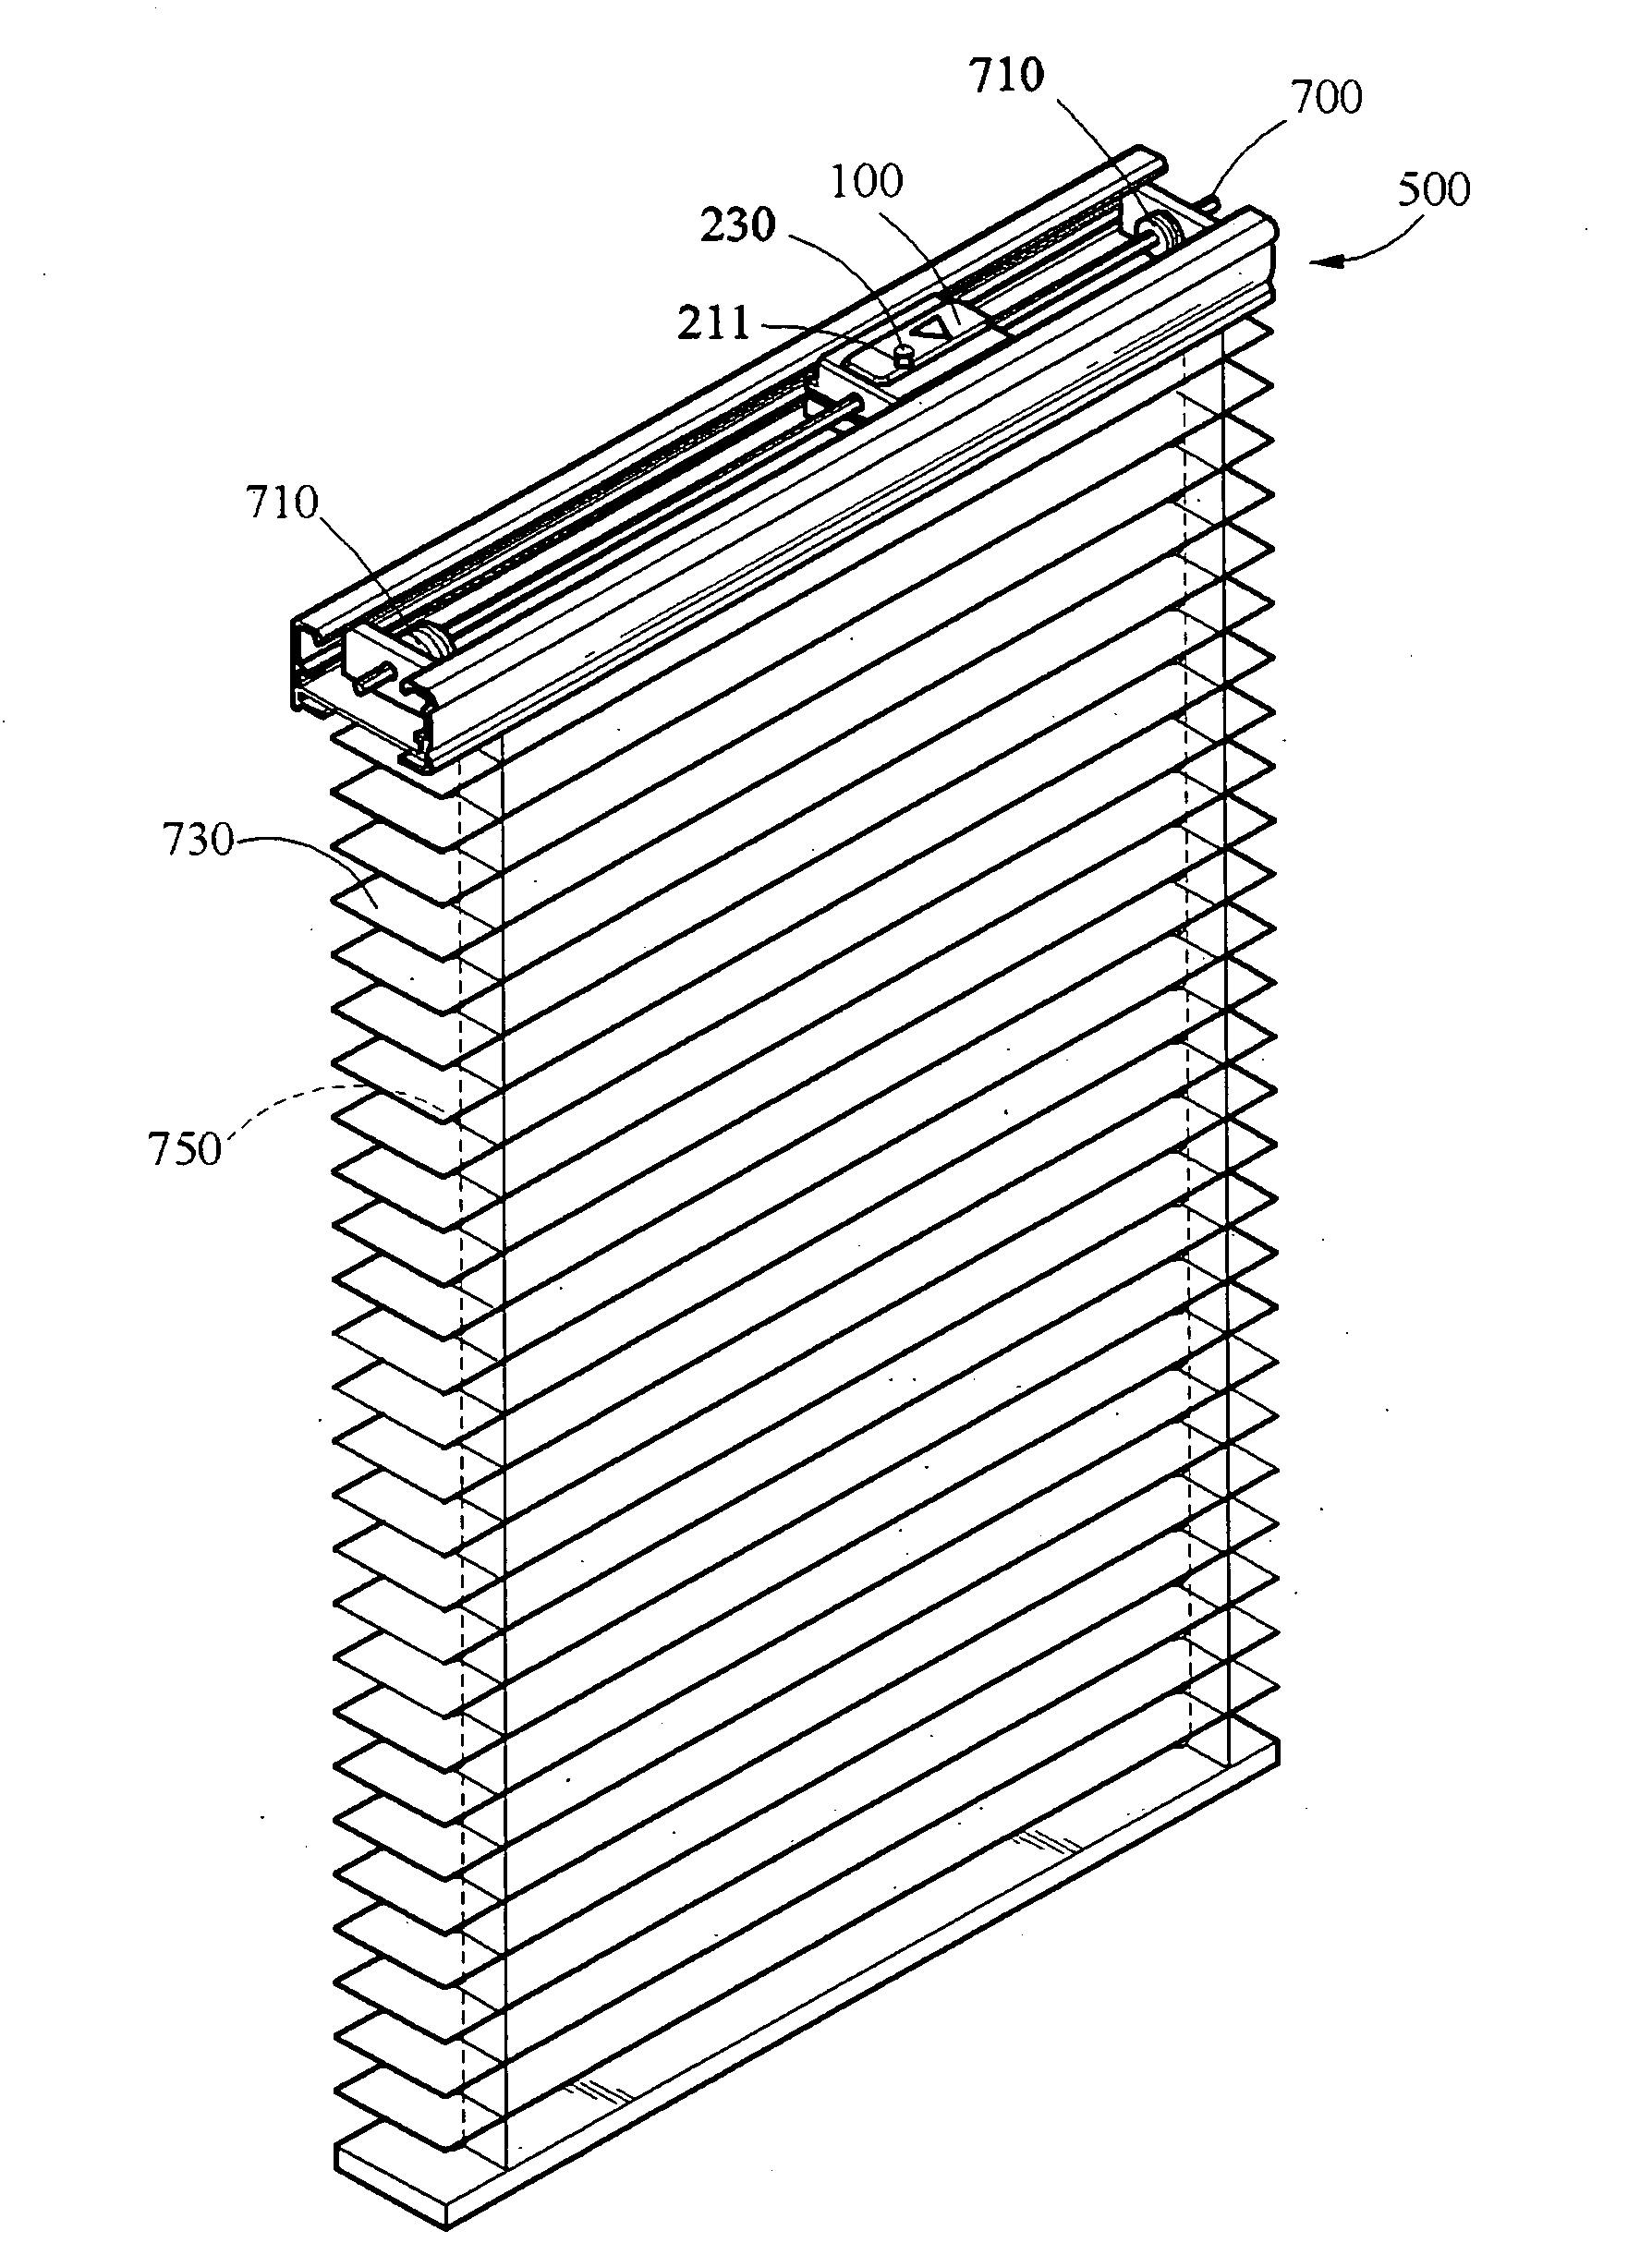 Combination structure of spring power assembly and head rail